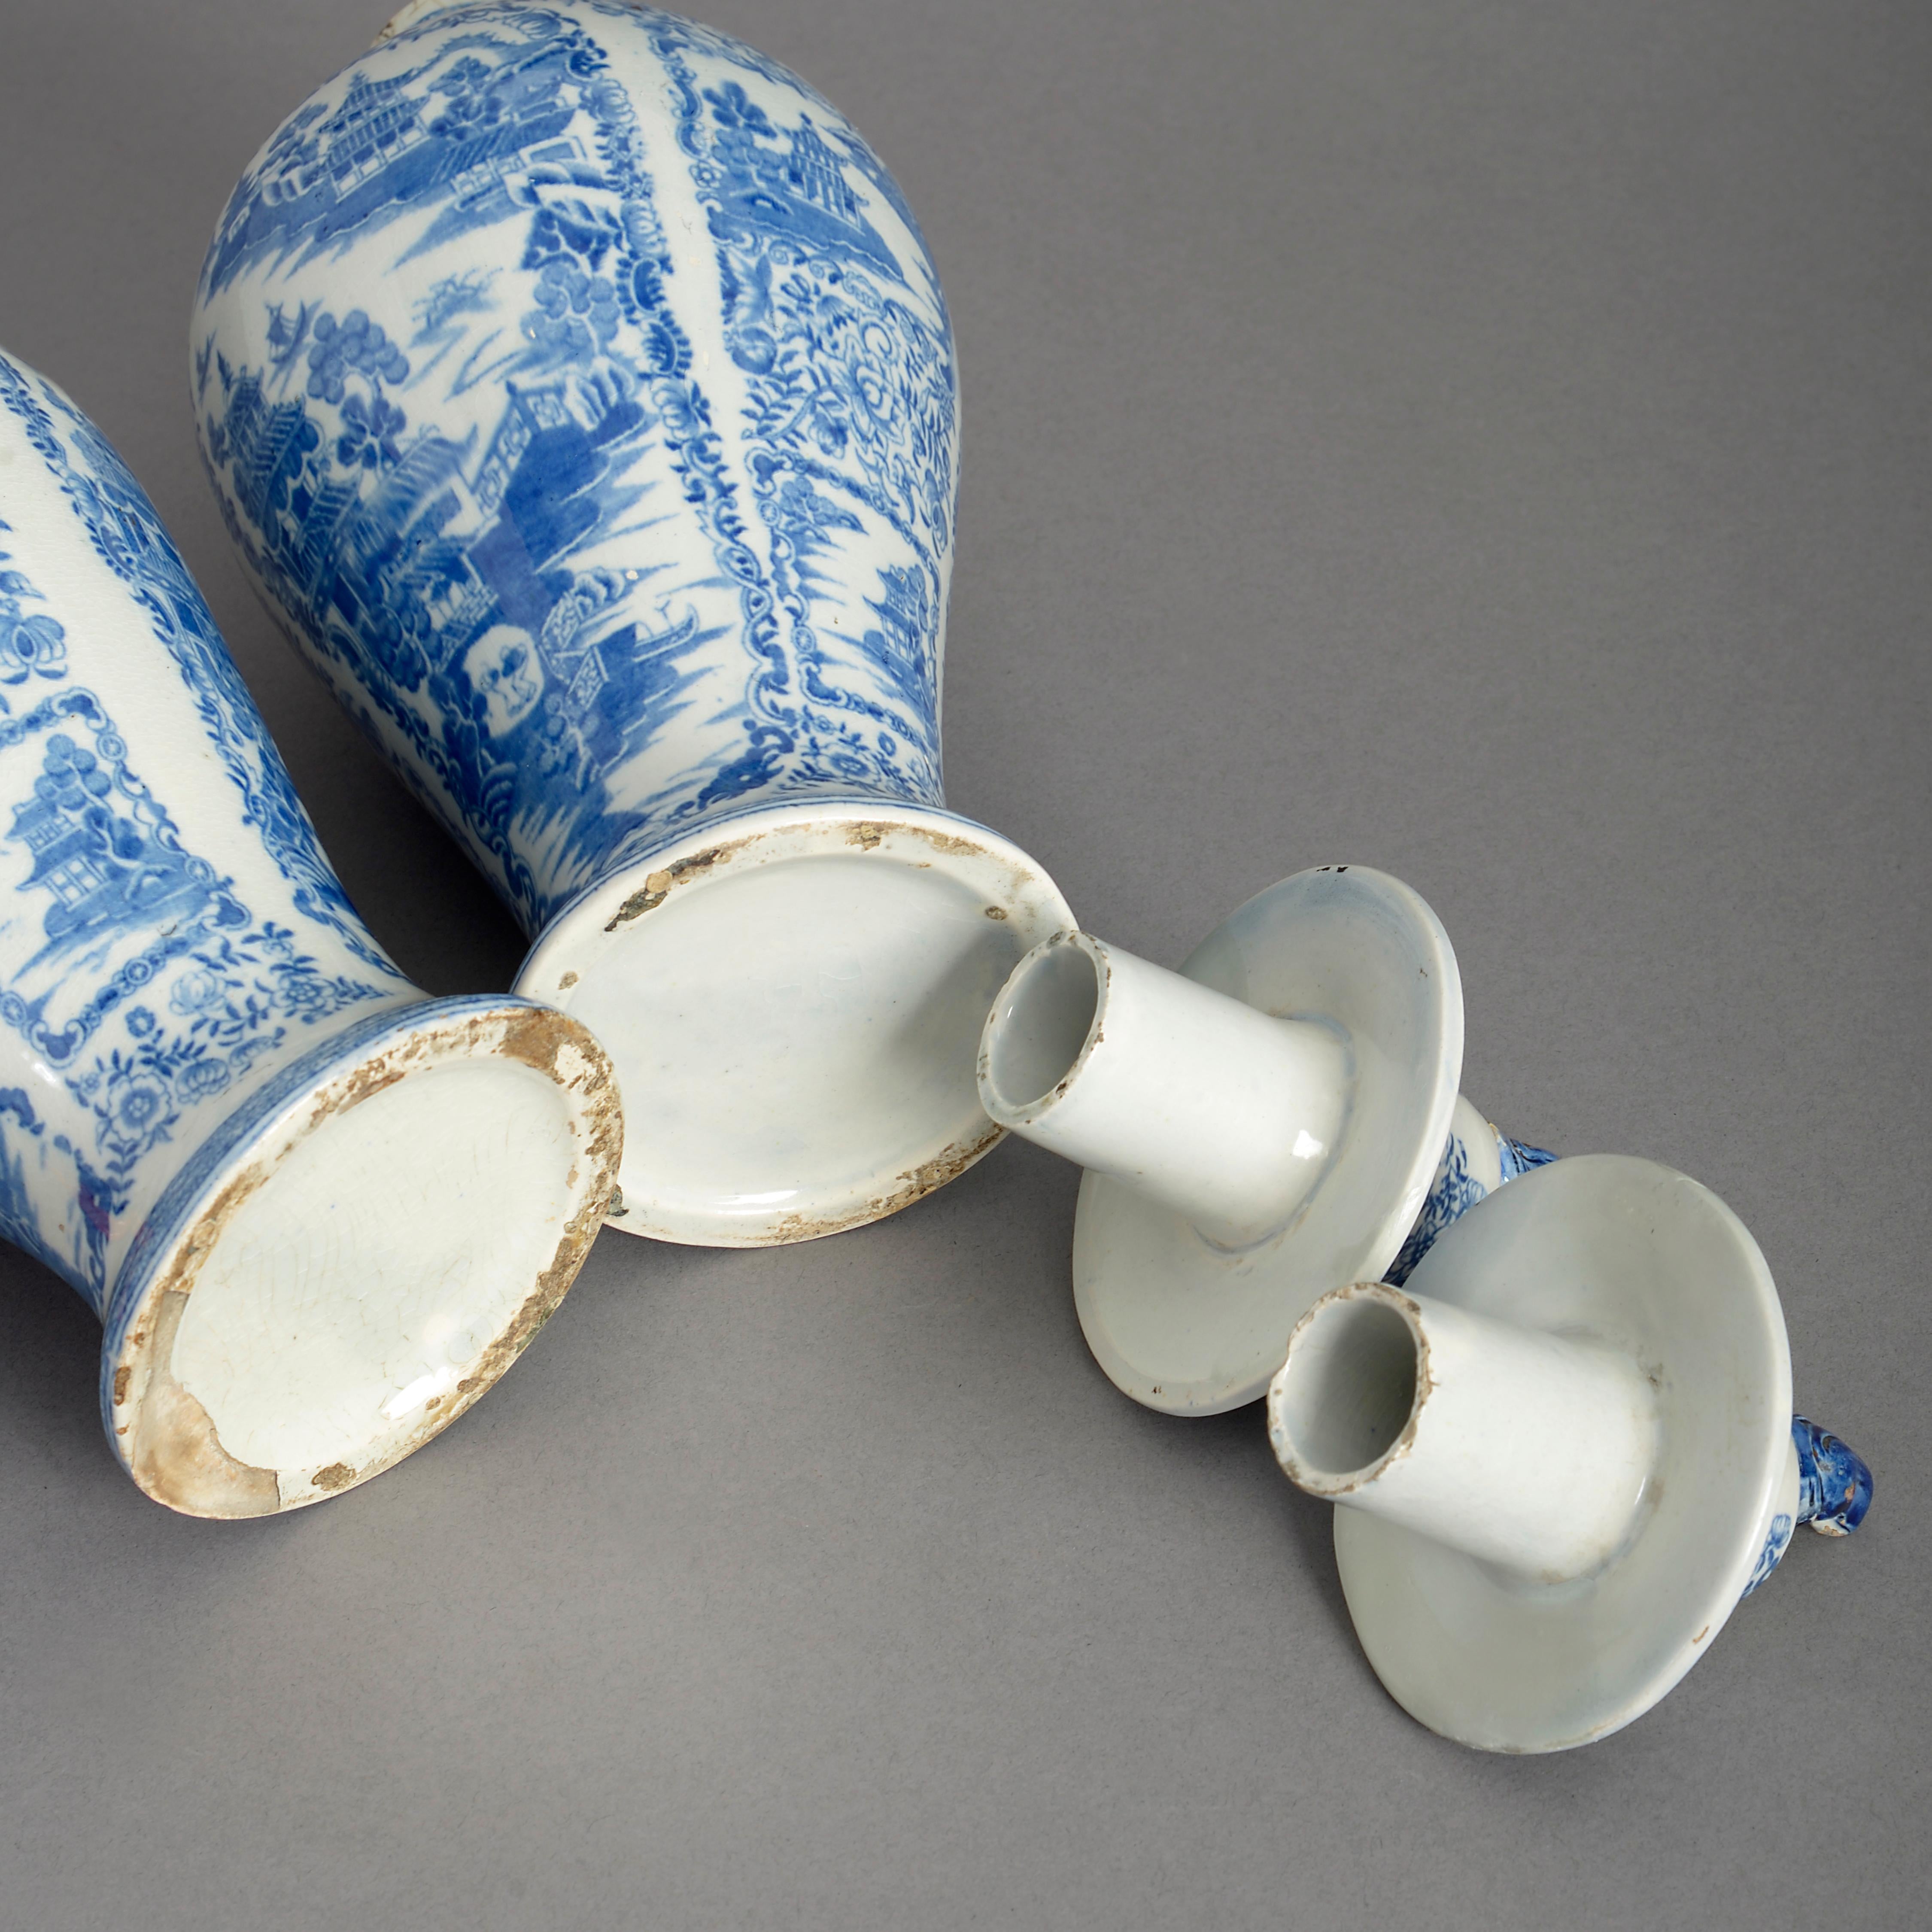 Ceramic Pair of 18th Century Blue and White Staffordshire Pottery Vases and Covers